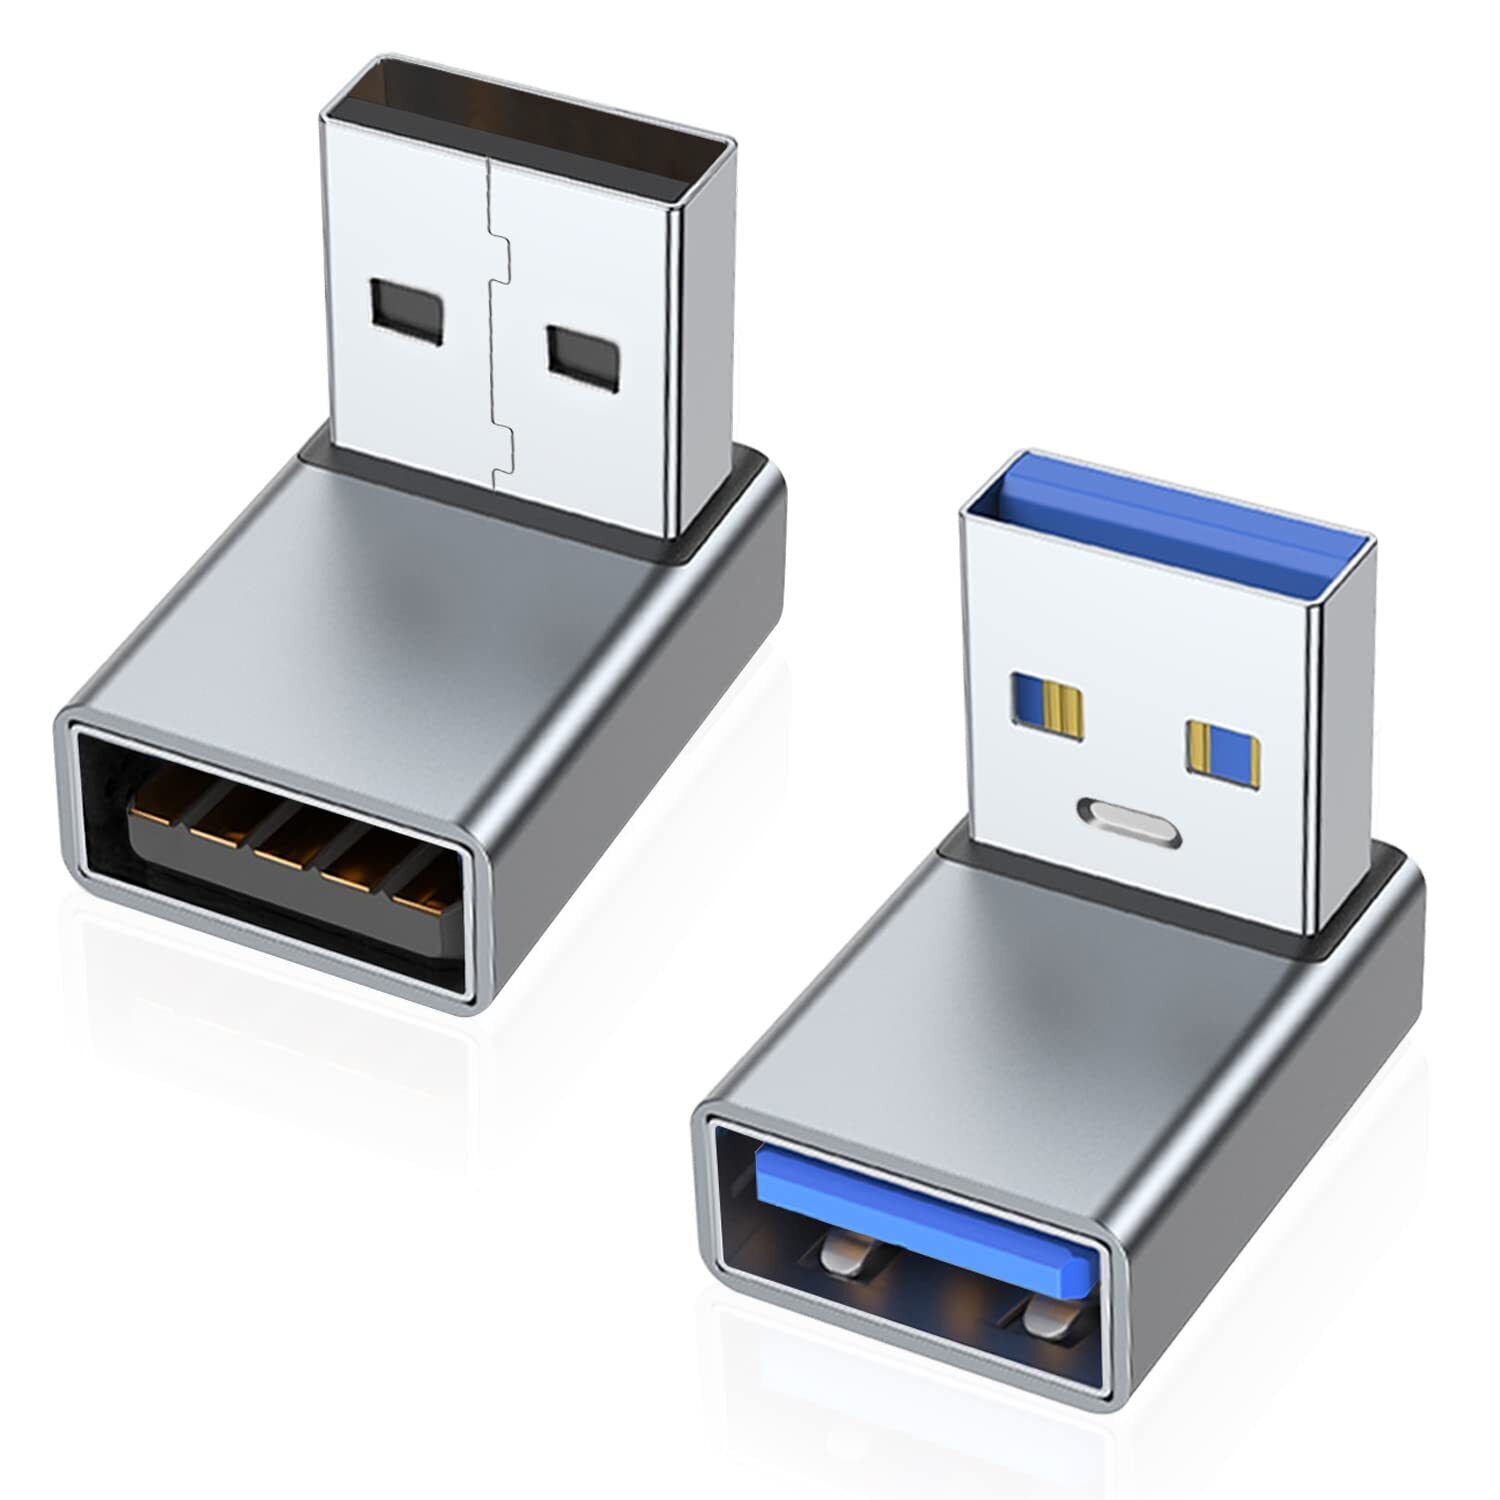 90 Degree USB 3.0 Adapter 2 Pack Upward Angle USB a Male to Female Converter Ex